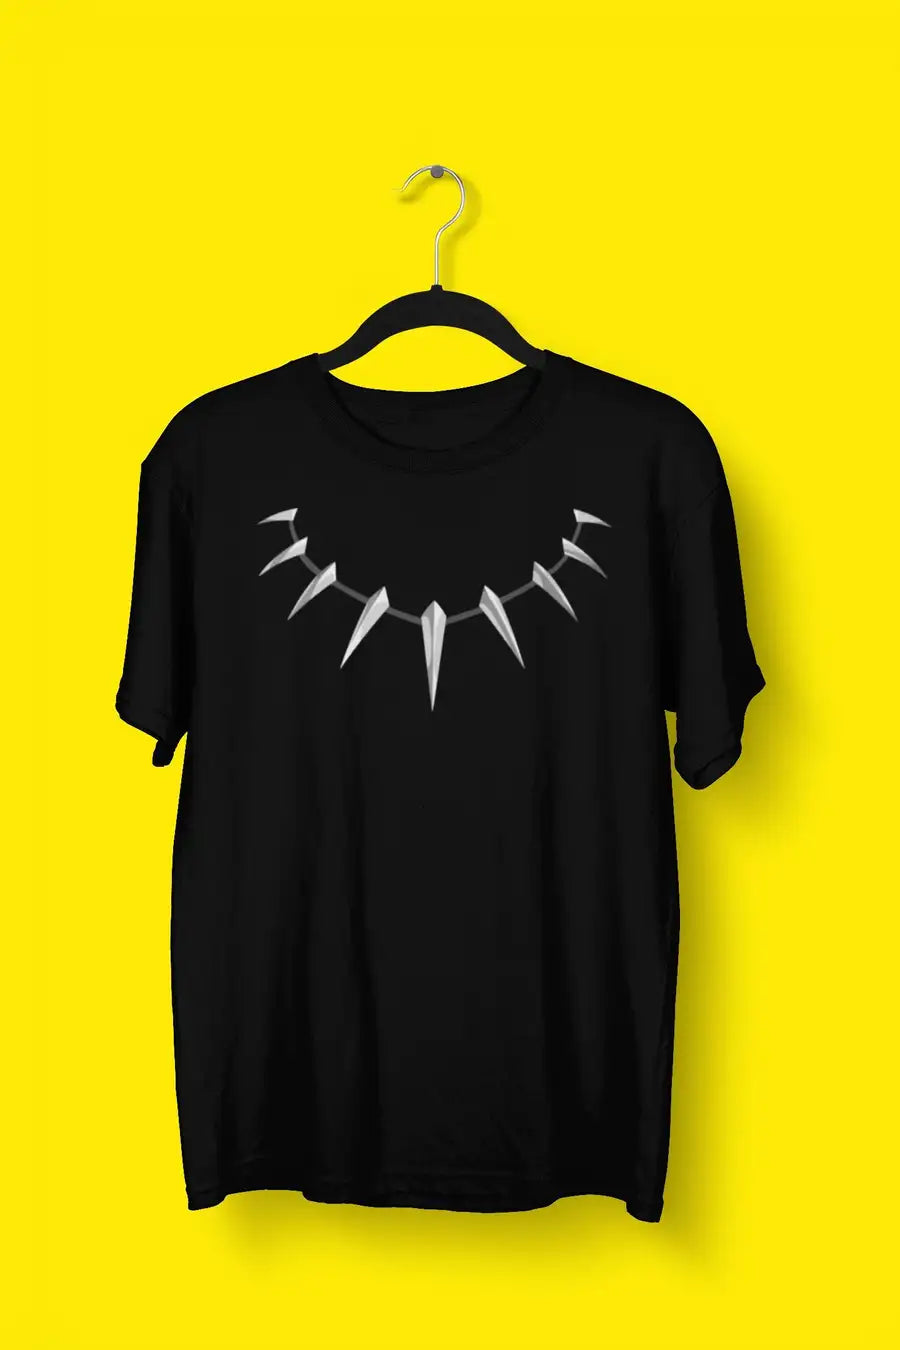 Exclusive Black Panther Necklace T Shirt for Men and Women | Premium Design | Catch My Drift India - Catch My Drift India Clothing black, bollywood, clothing, hollywood, made in india, movies